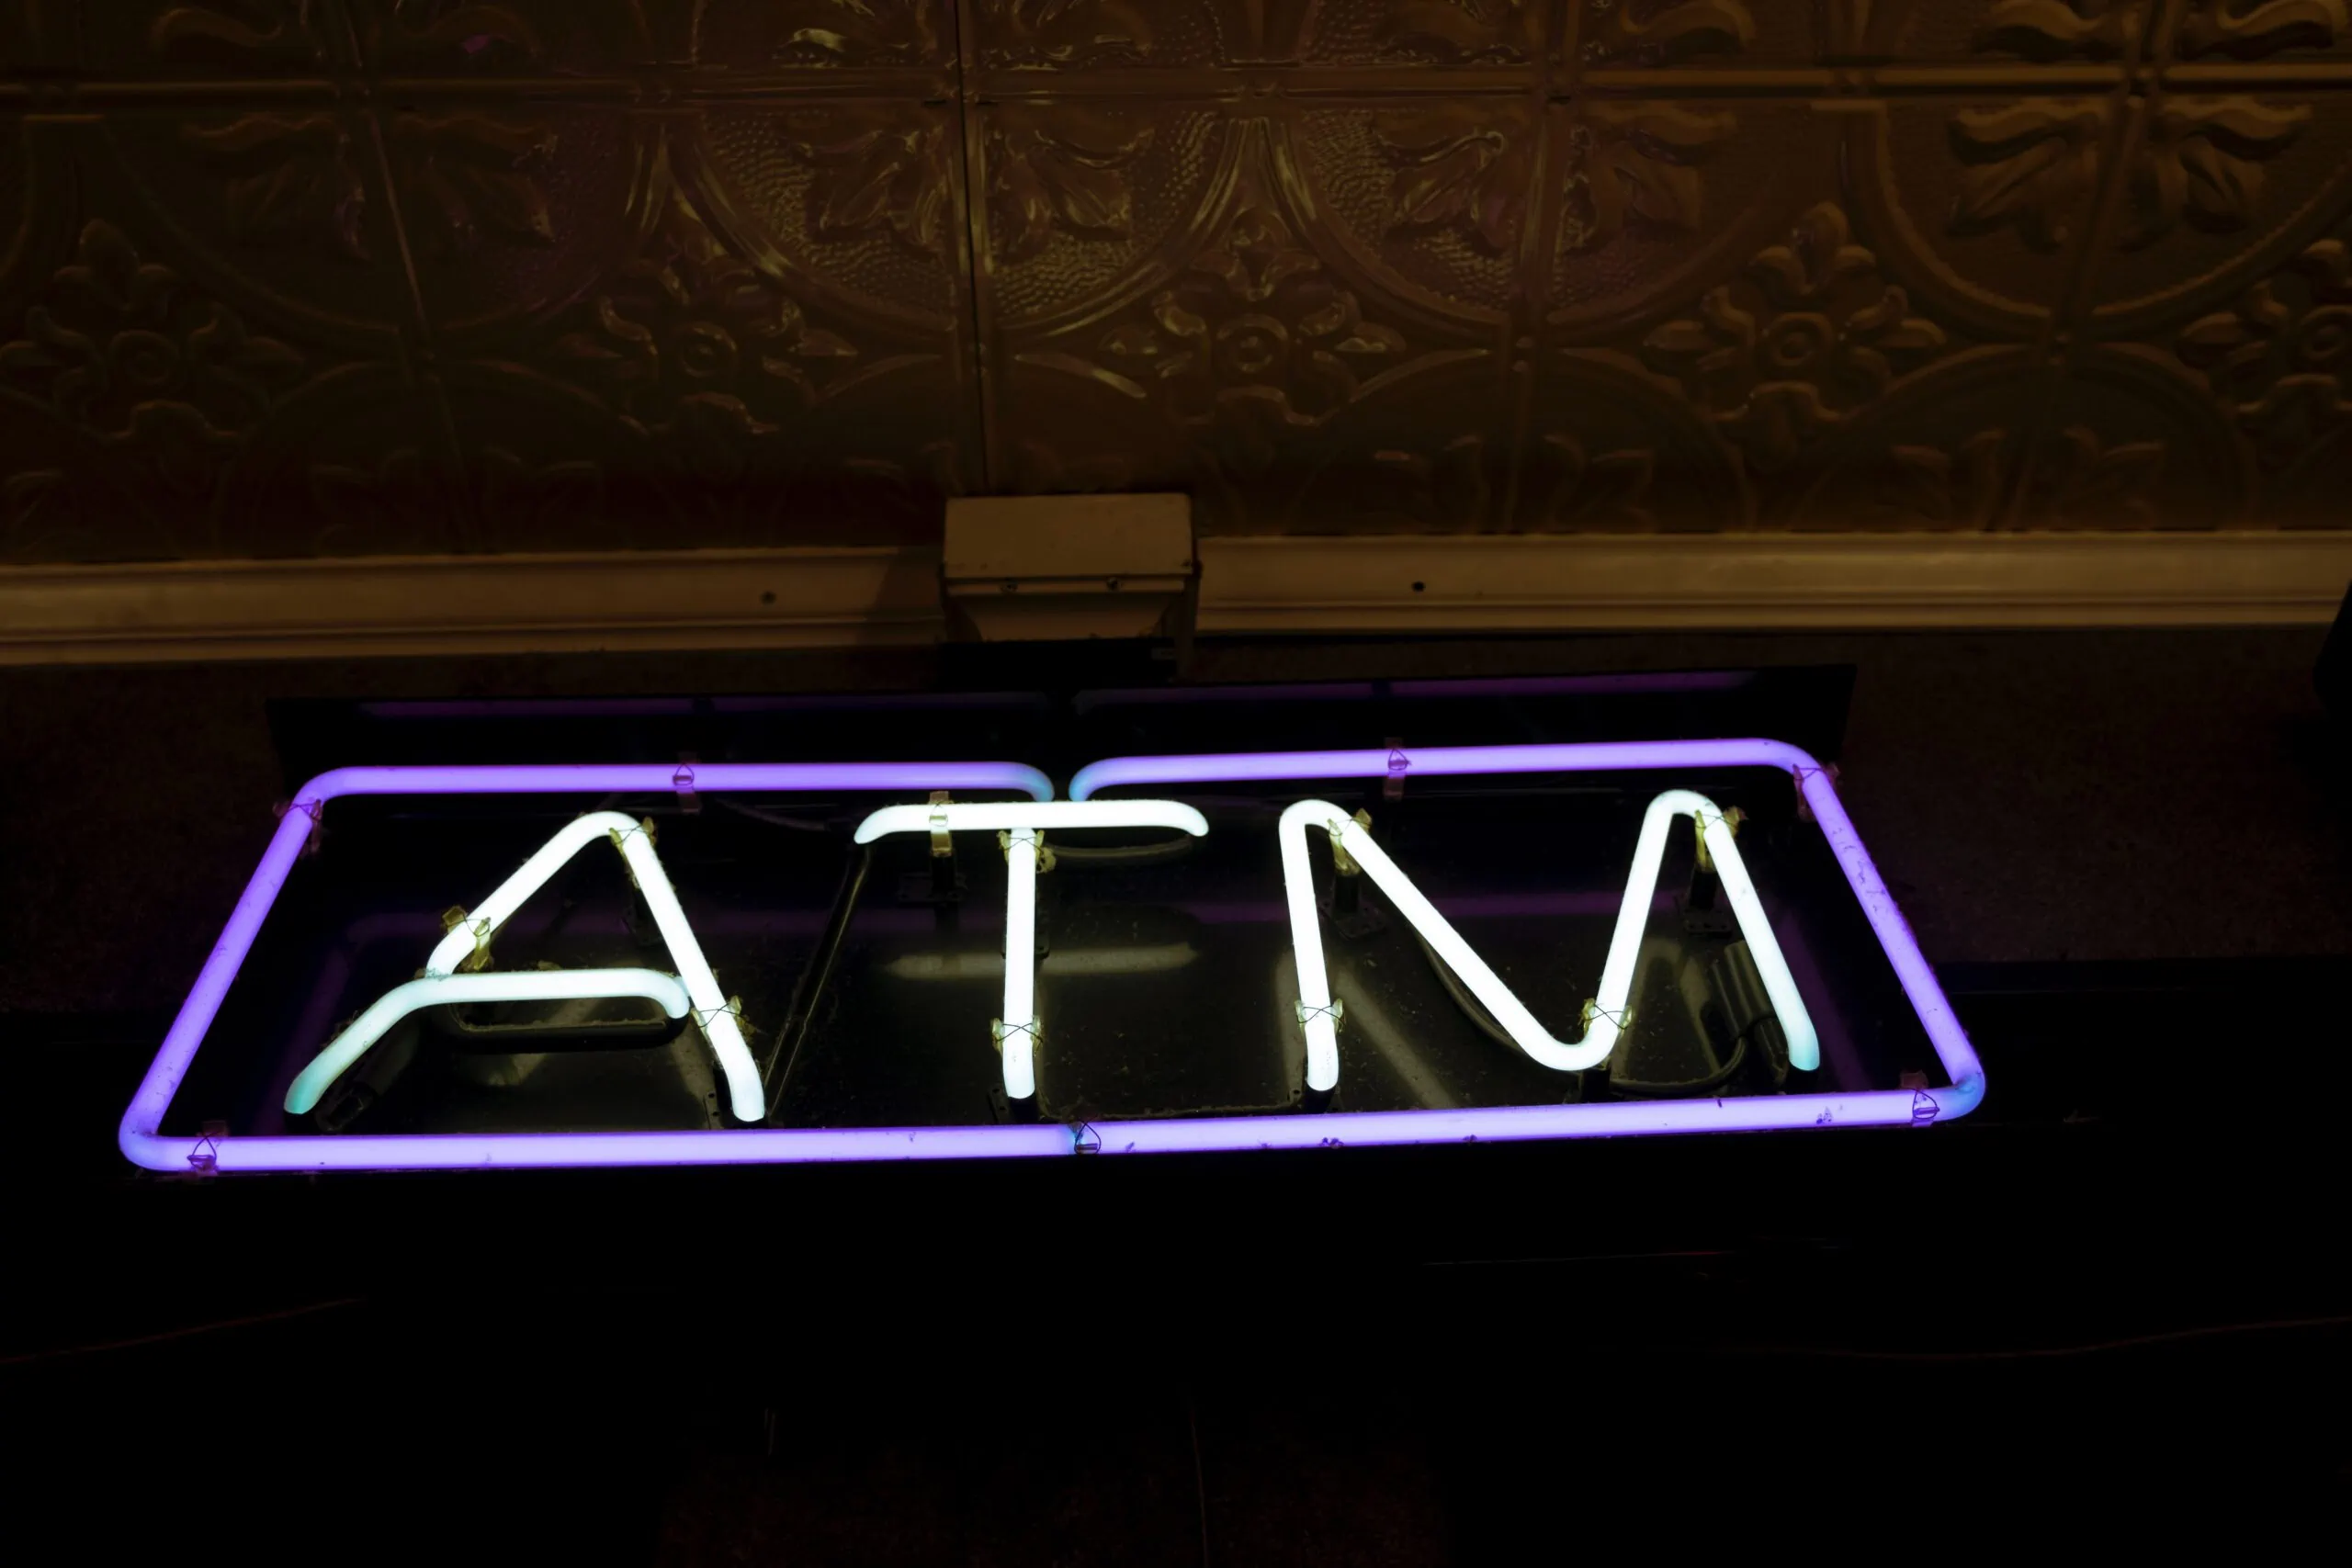 ATM sign in financial institution with bank security cameras